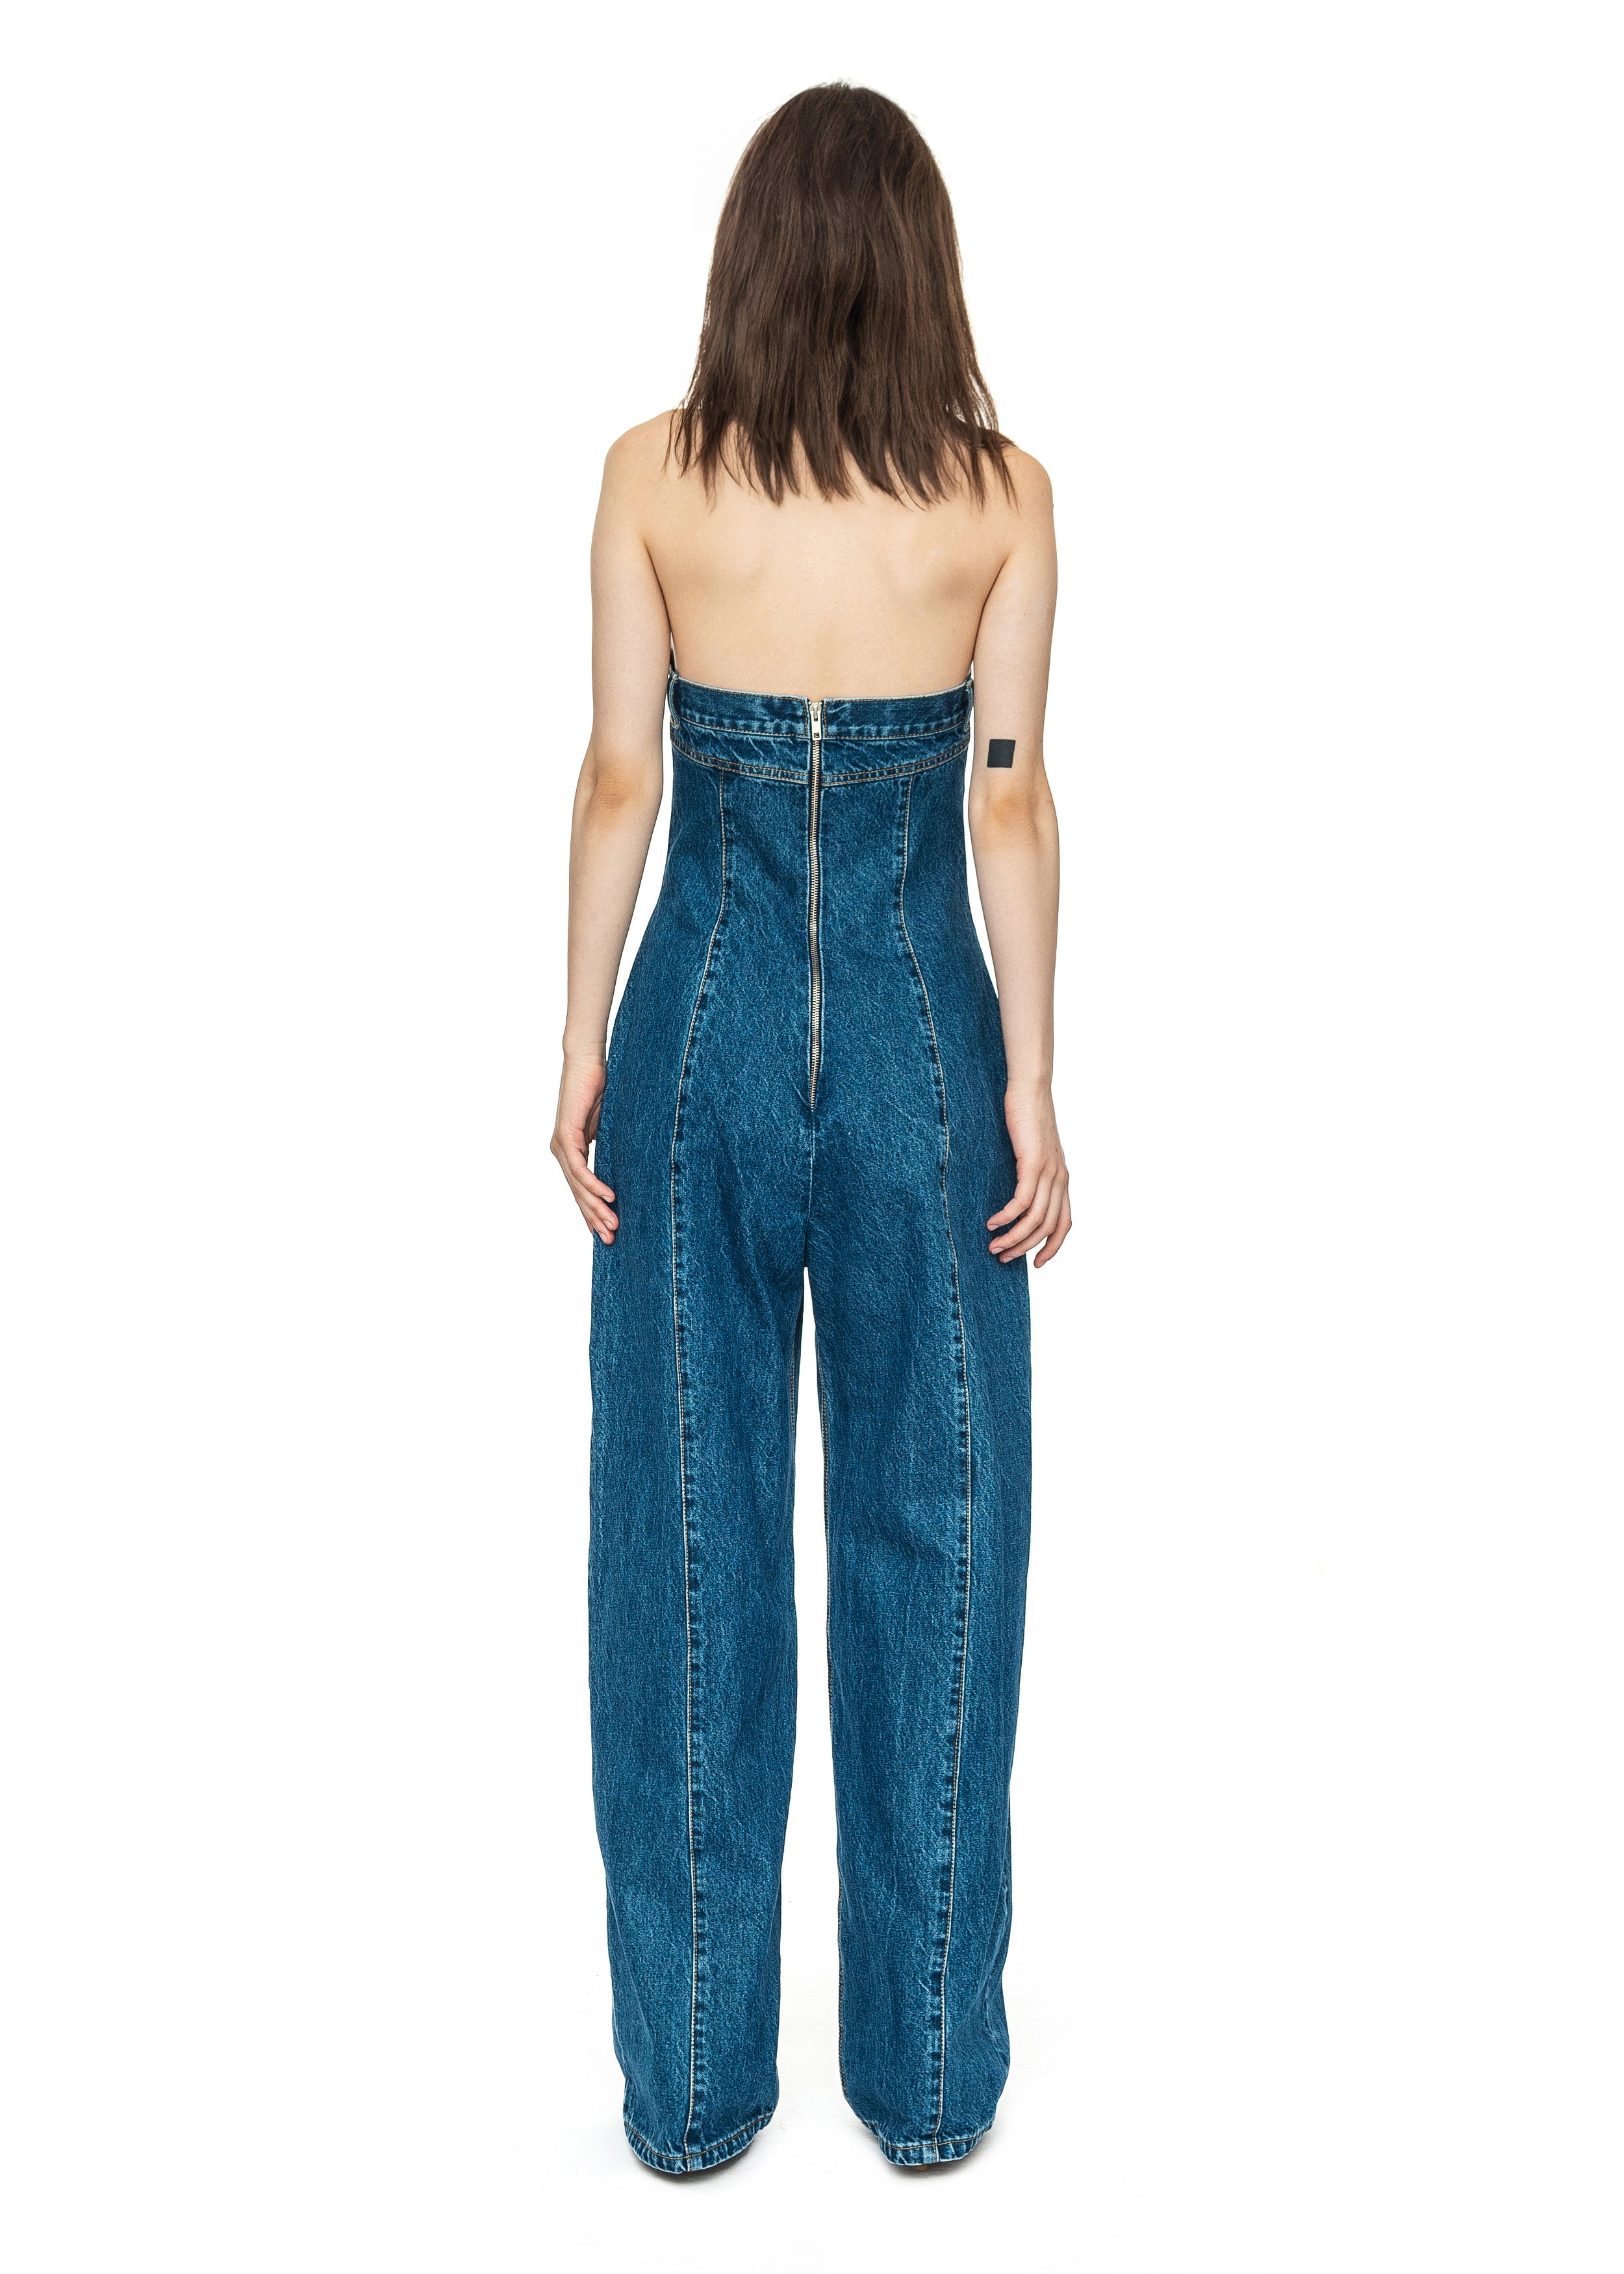 Jeans Overall with Front Zipper image